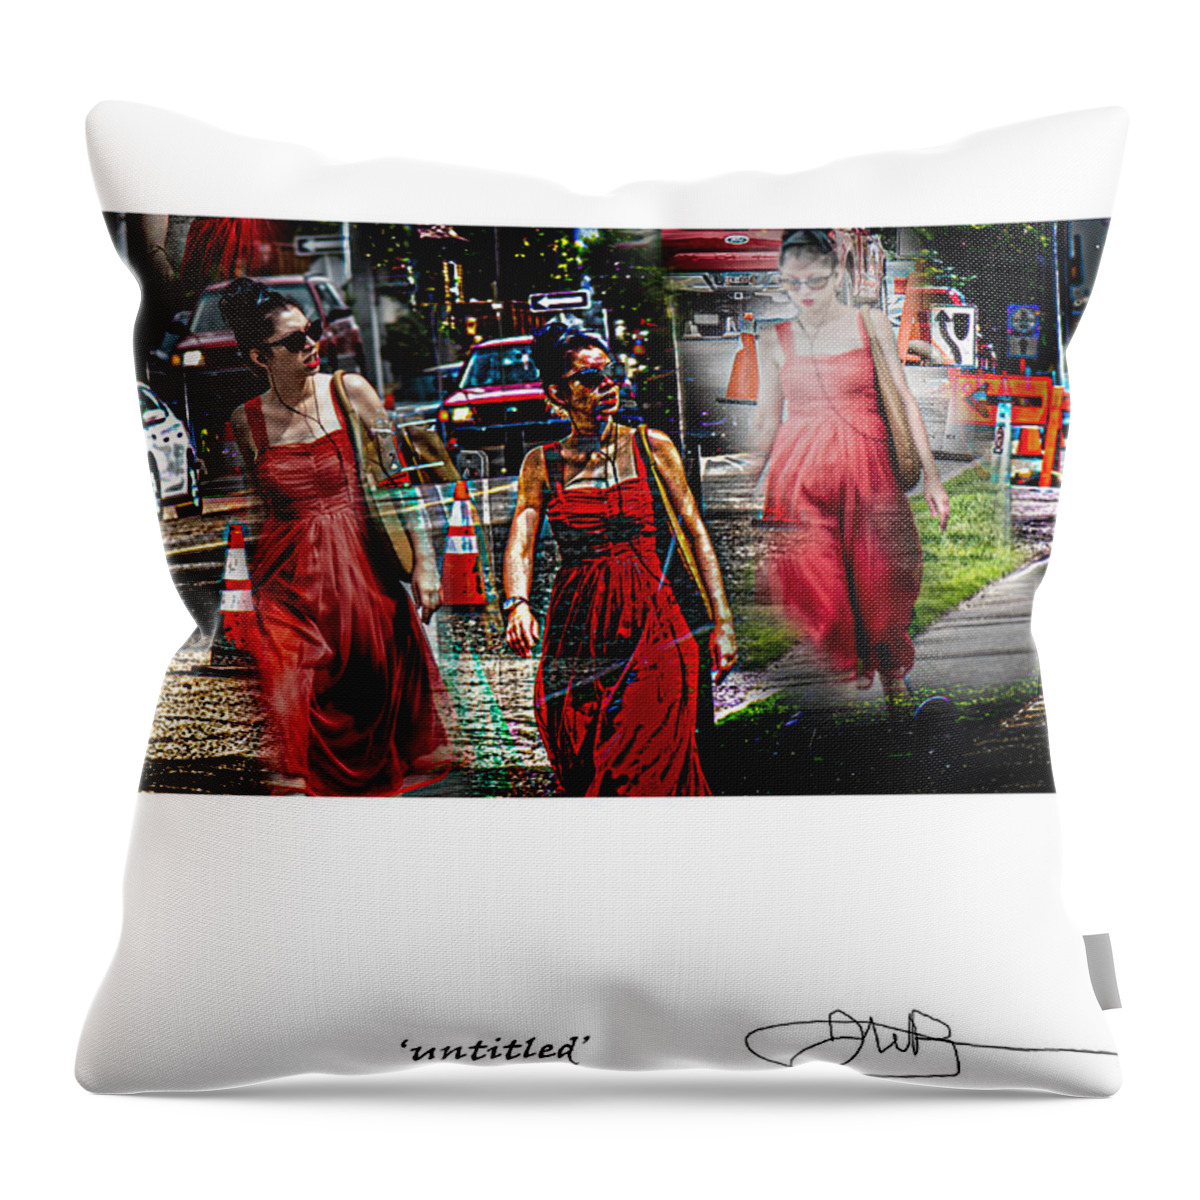 Signed Limited Edition Of 10 Throw Pillow featuring the digital art 41 by Jerald Blackstock